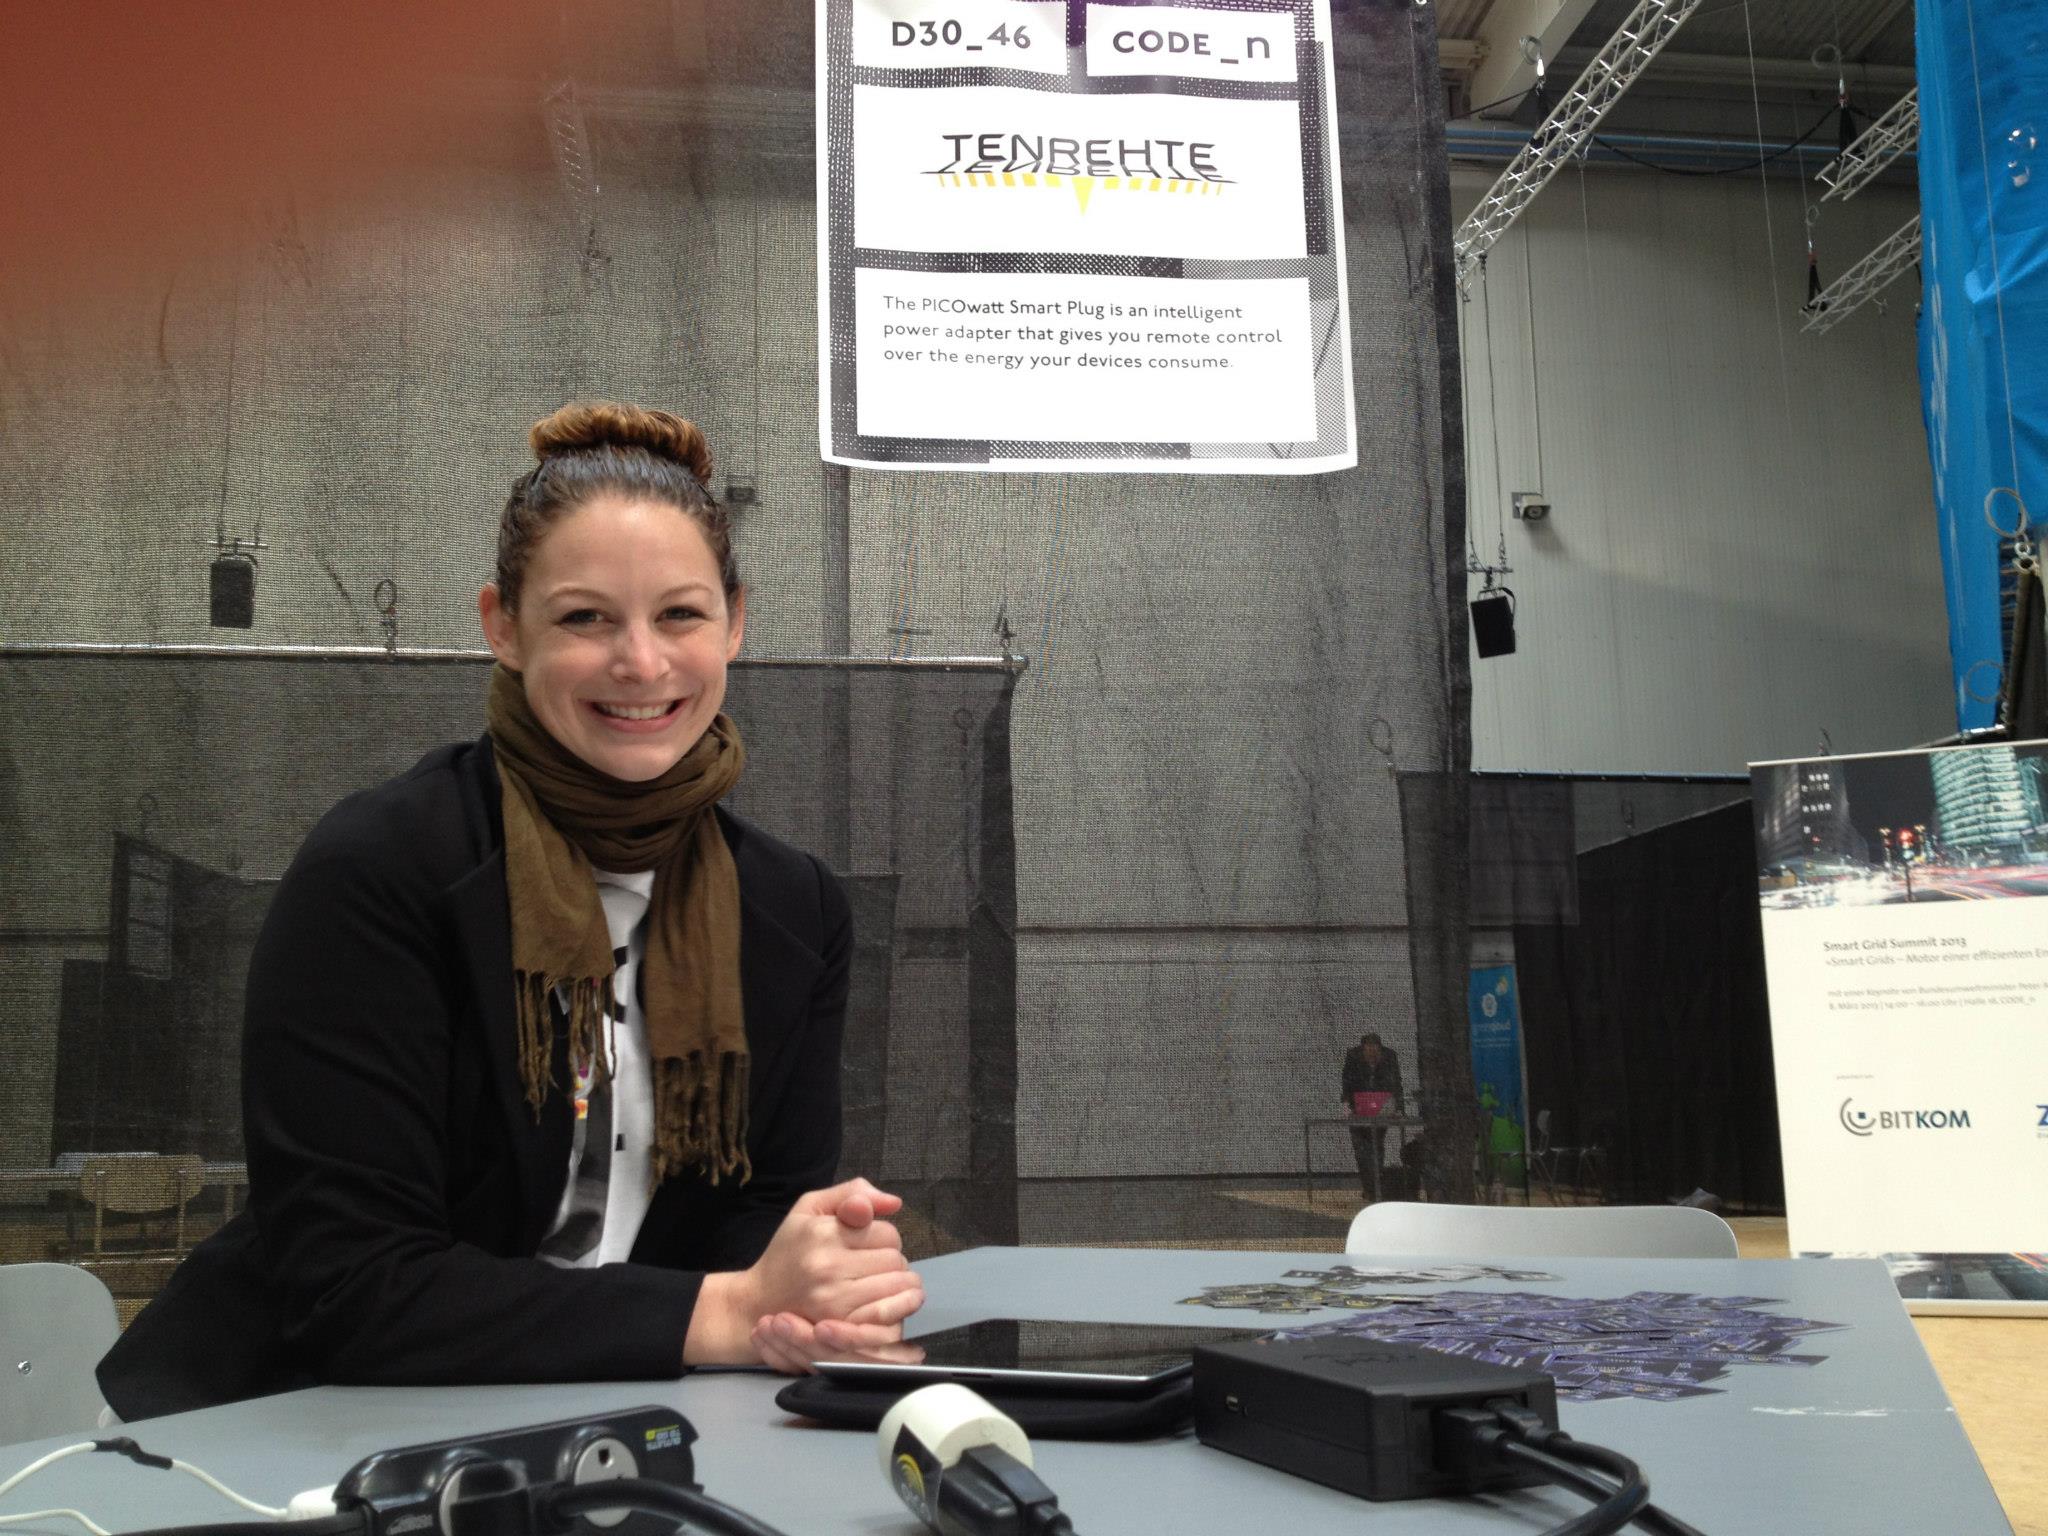 Tenrehte CEO Jennifer Indovina at our CODE_n booth during Cebit 2013